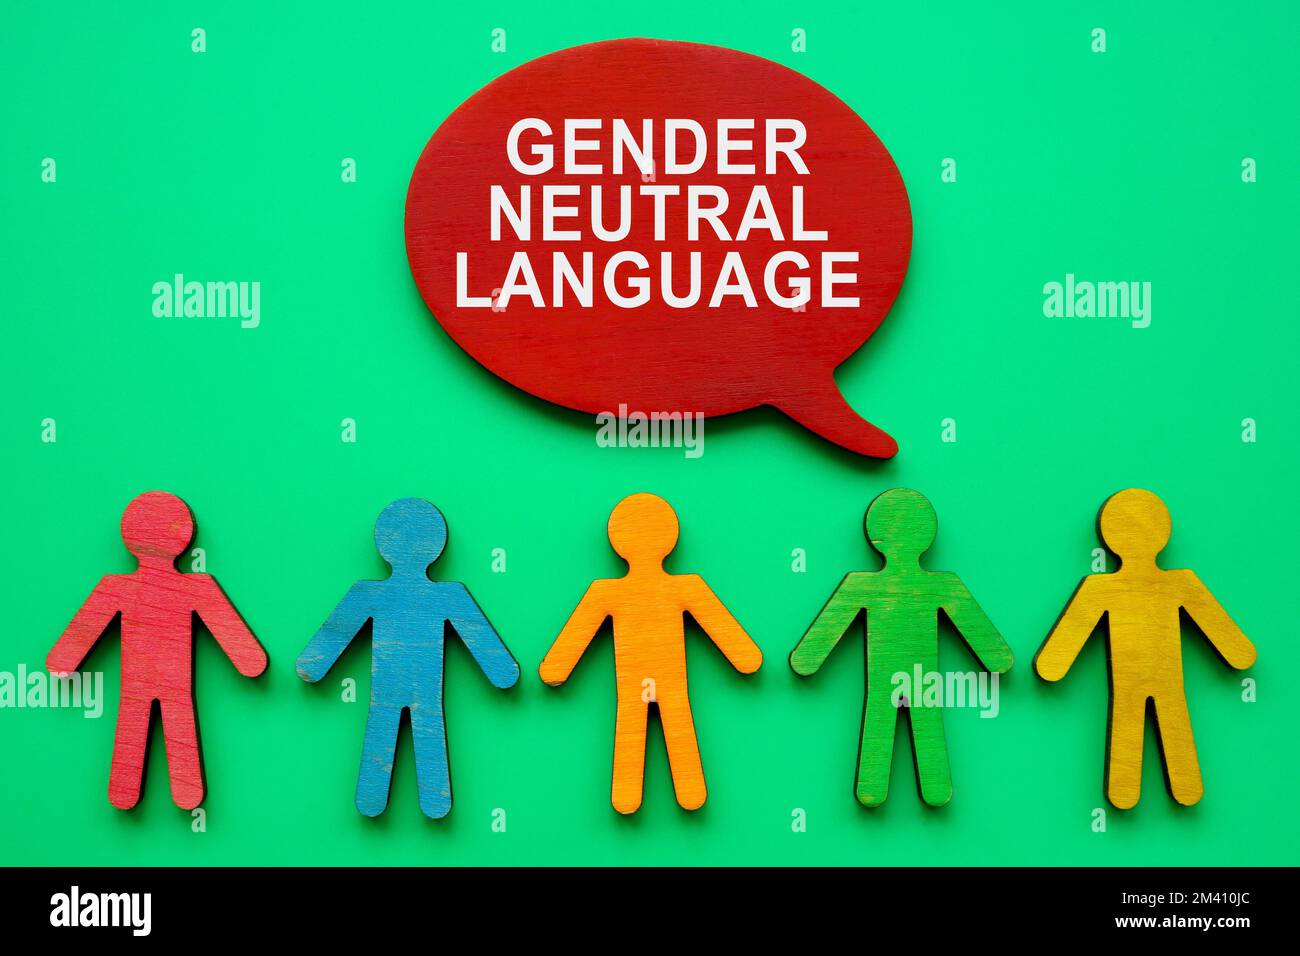 Gender neutral language inscription and colorful figurines. Stock Photo